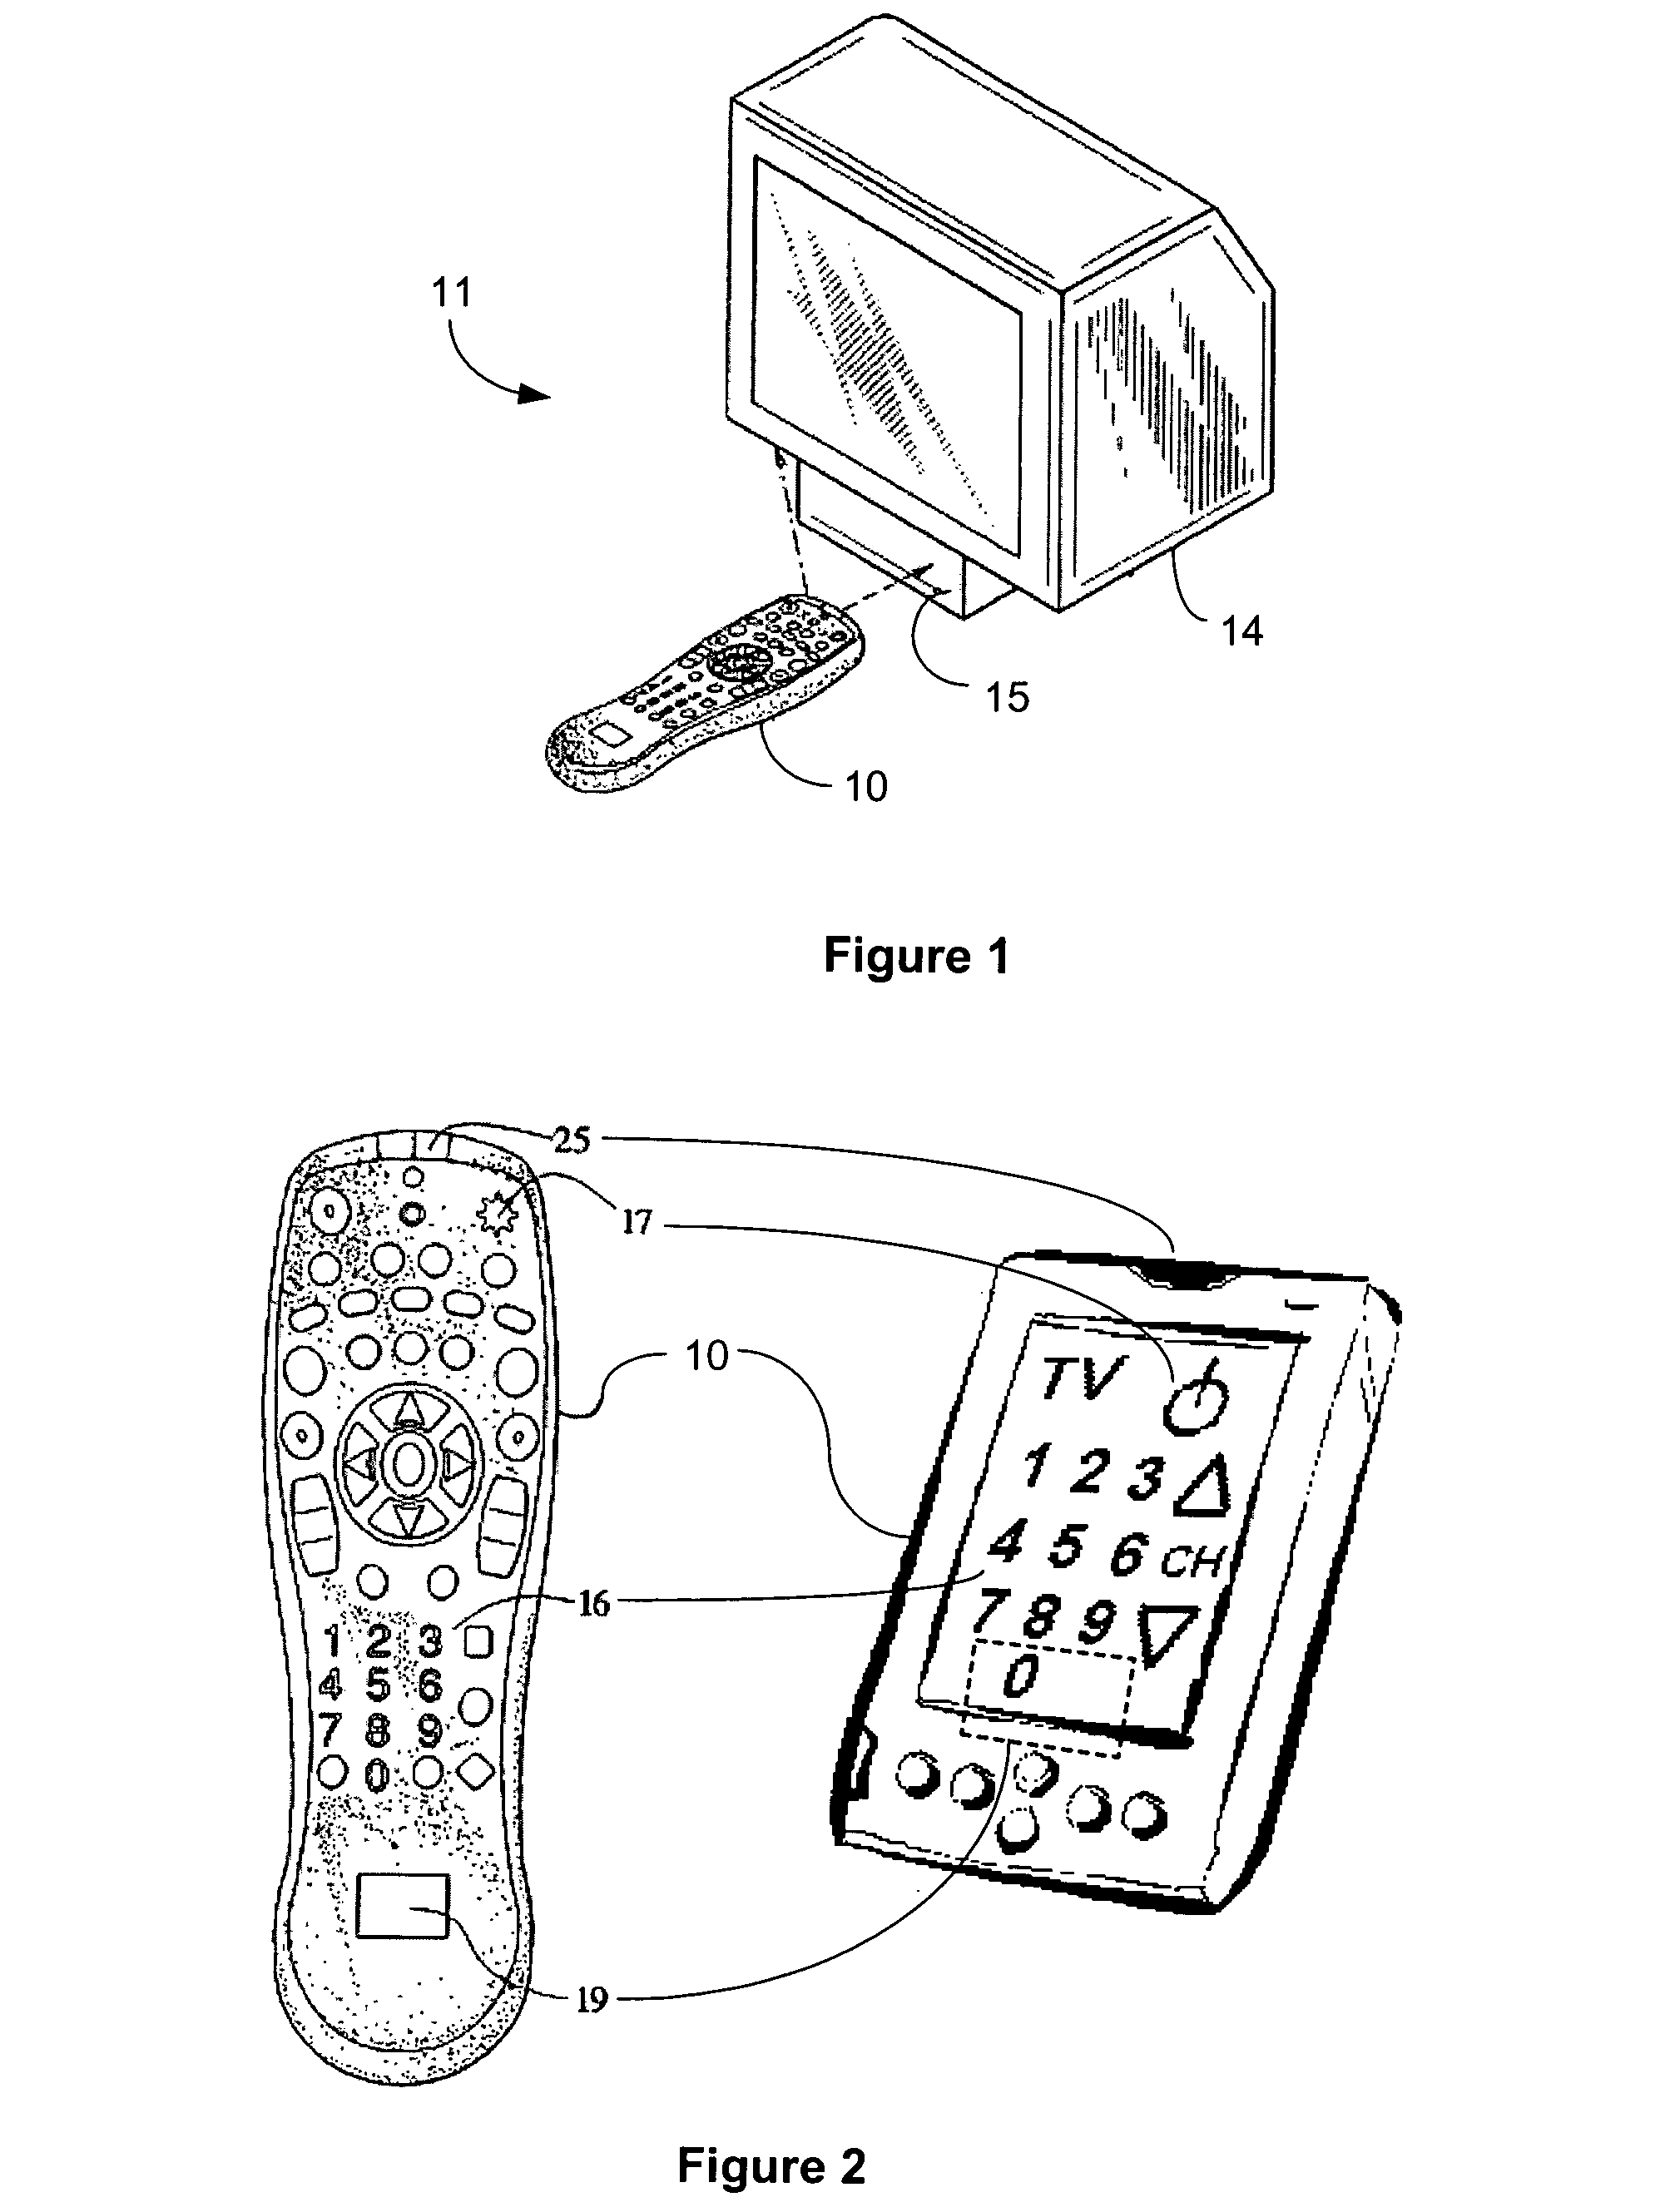 System and method for setting up a universal remote control